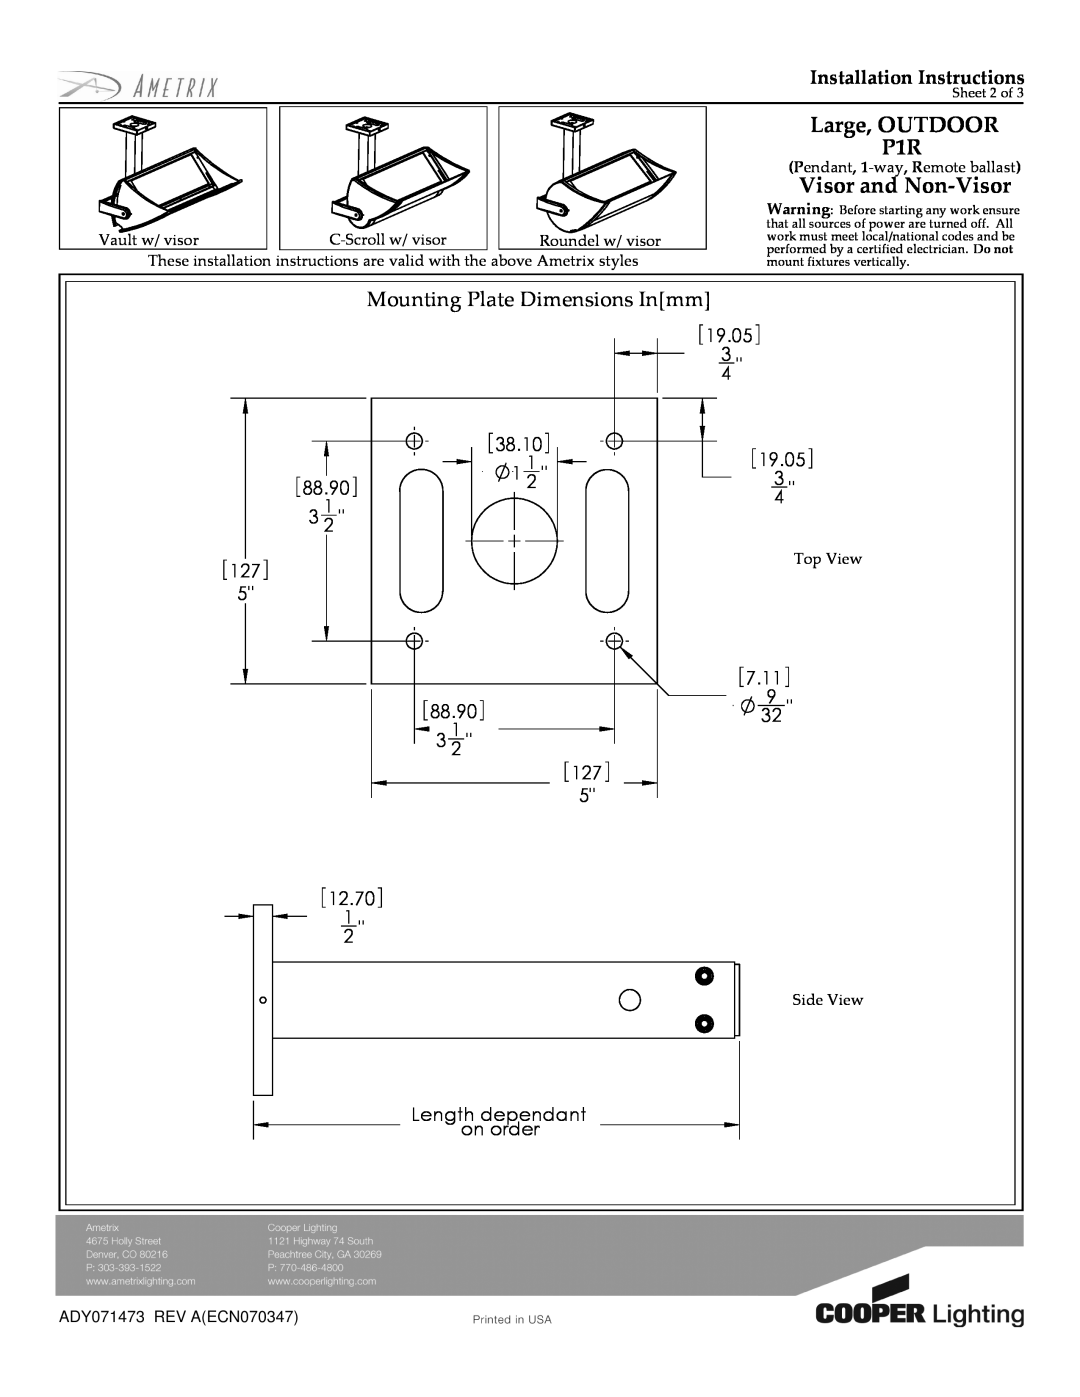 Cooper Lighting ADY071473 installation instructions Mounting Plate Dimensions Inmm, Large, OUTDOOR P1R, Visor and Non-Visor 